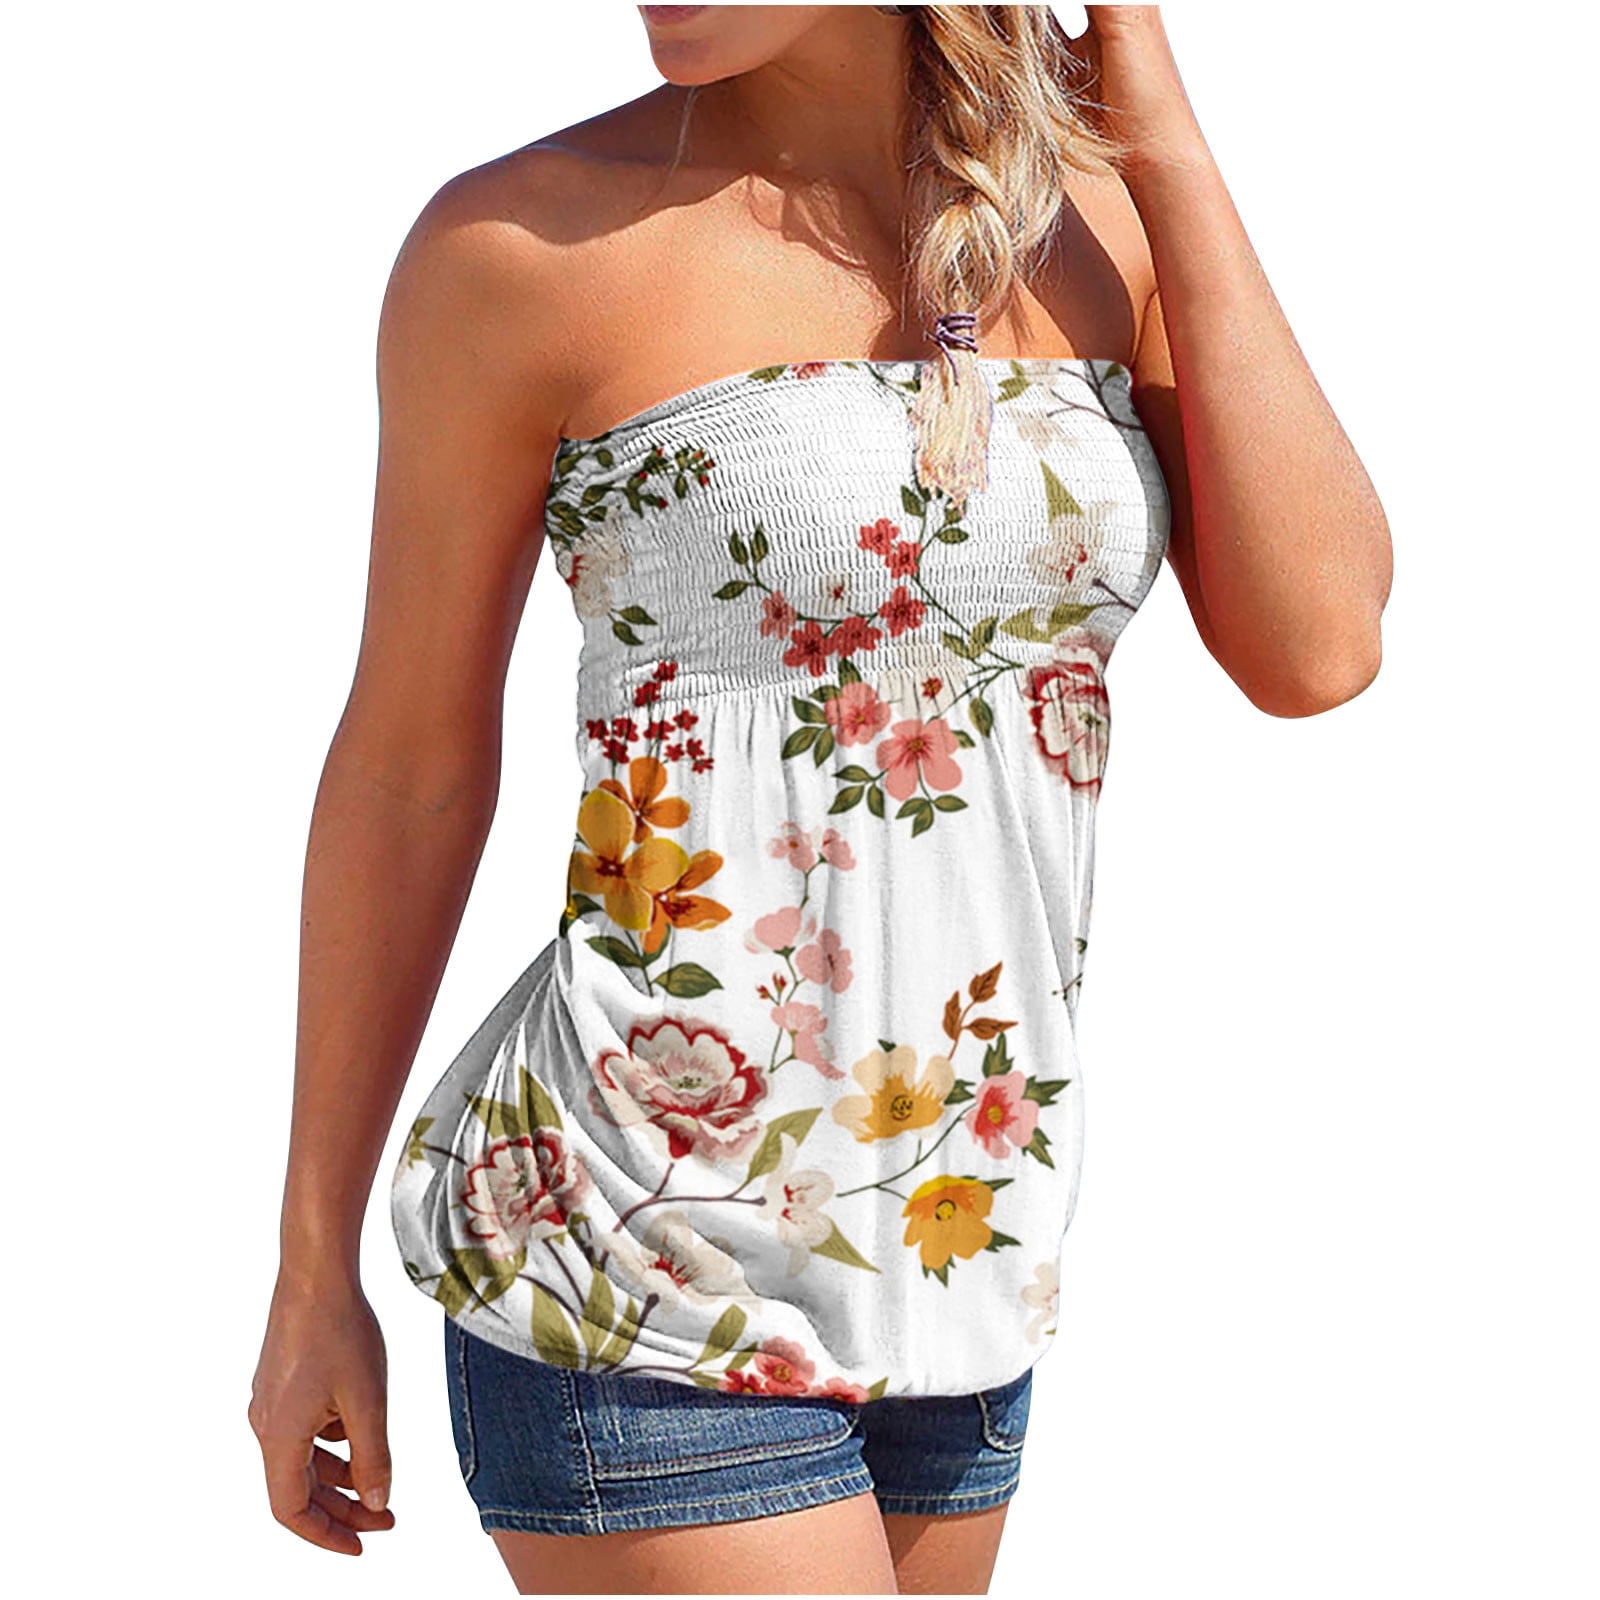 Clearance Sale Deal Tube Tops for Women Strapless Long Tube Top Elastic  Tube Top Floral Print Bandeau Tee Beach Vacation T-shirt Top Shirts